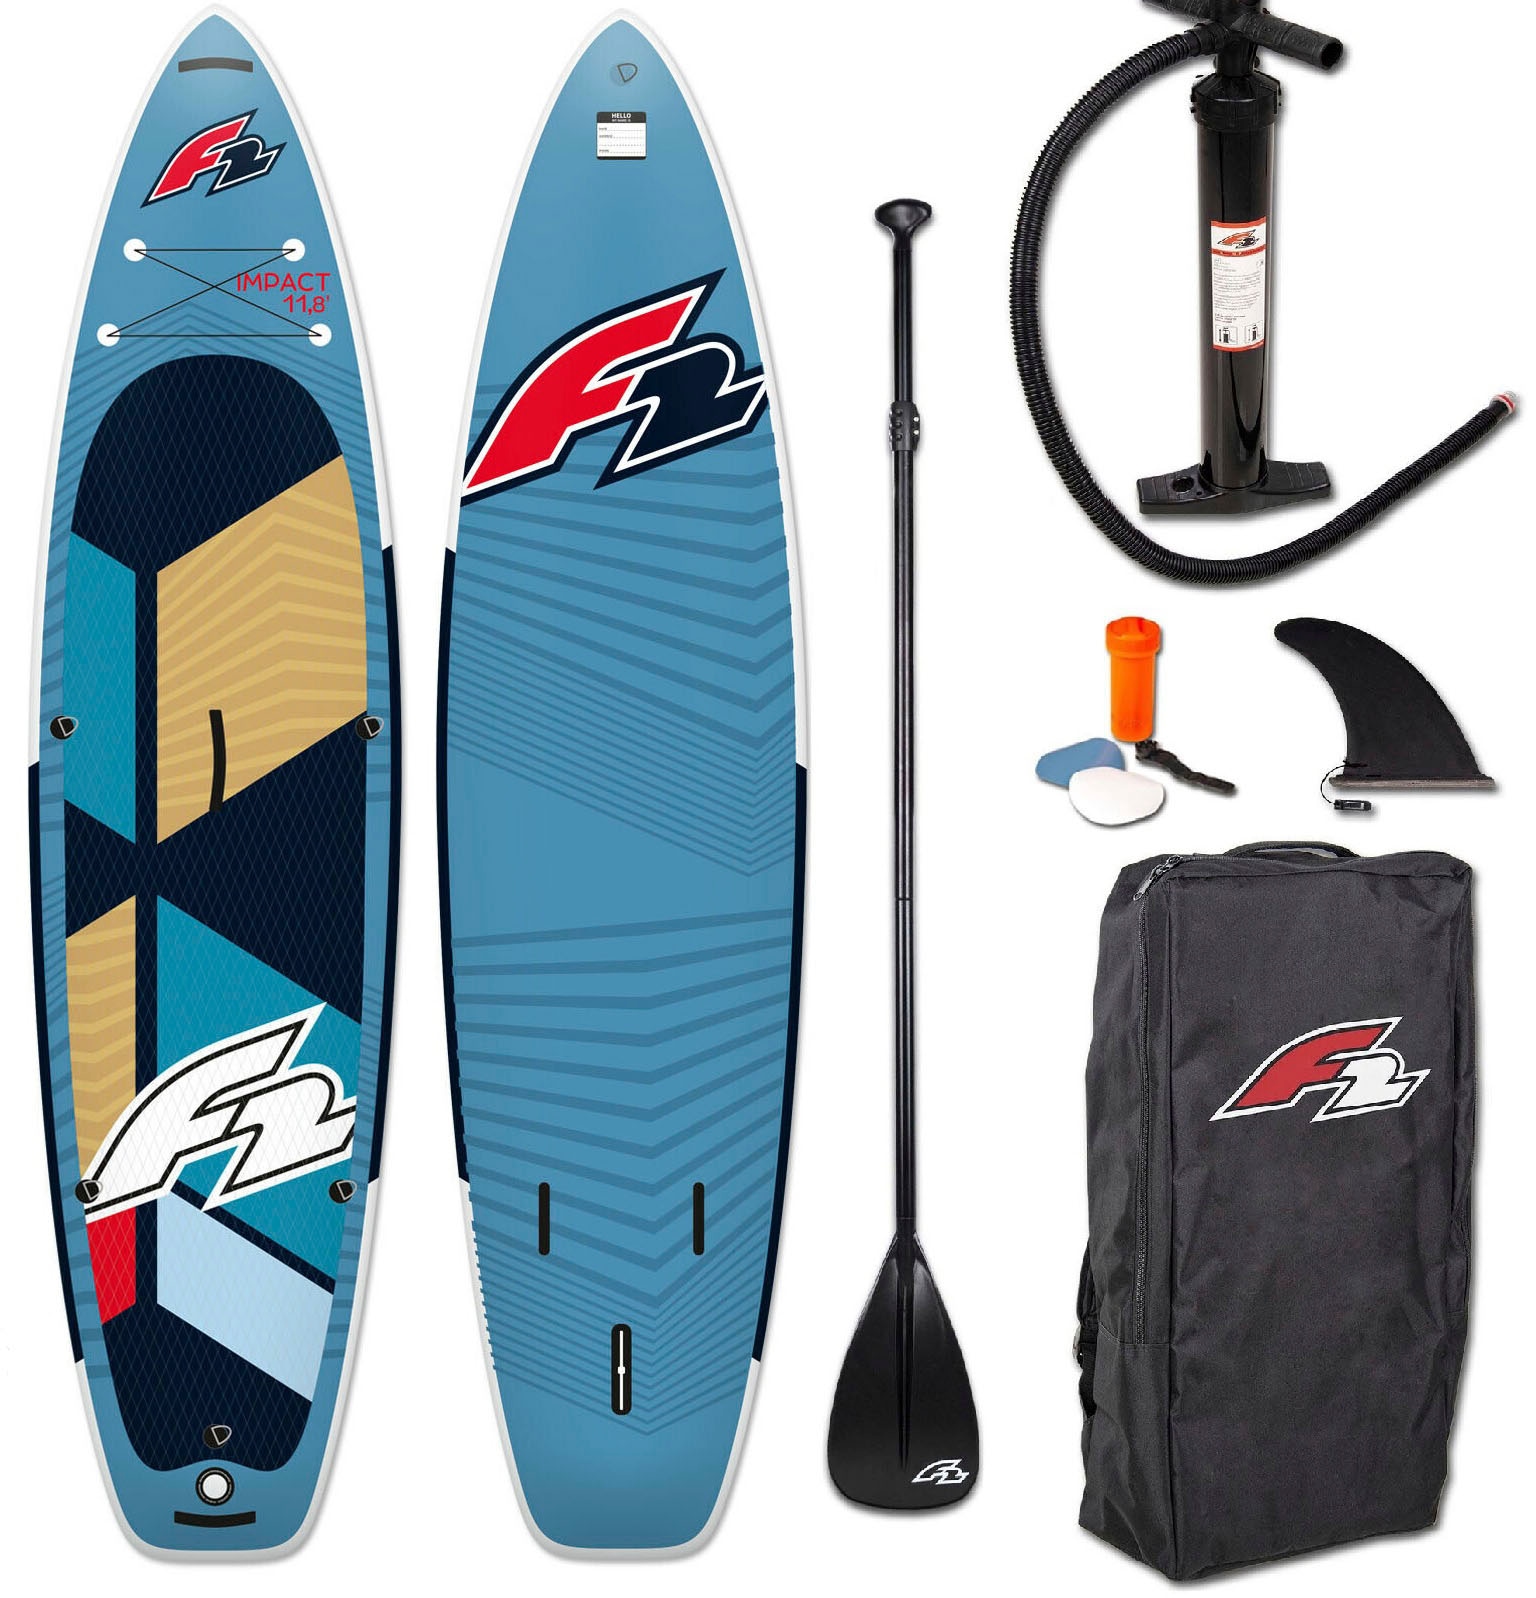 F2 im Shop »Impact (Packung, tlg.) OTTO Online 10,8«, 5 turquoise SUP-Board Inflatable